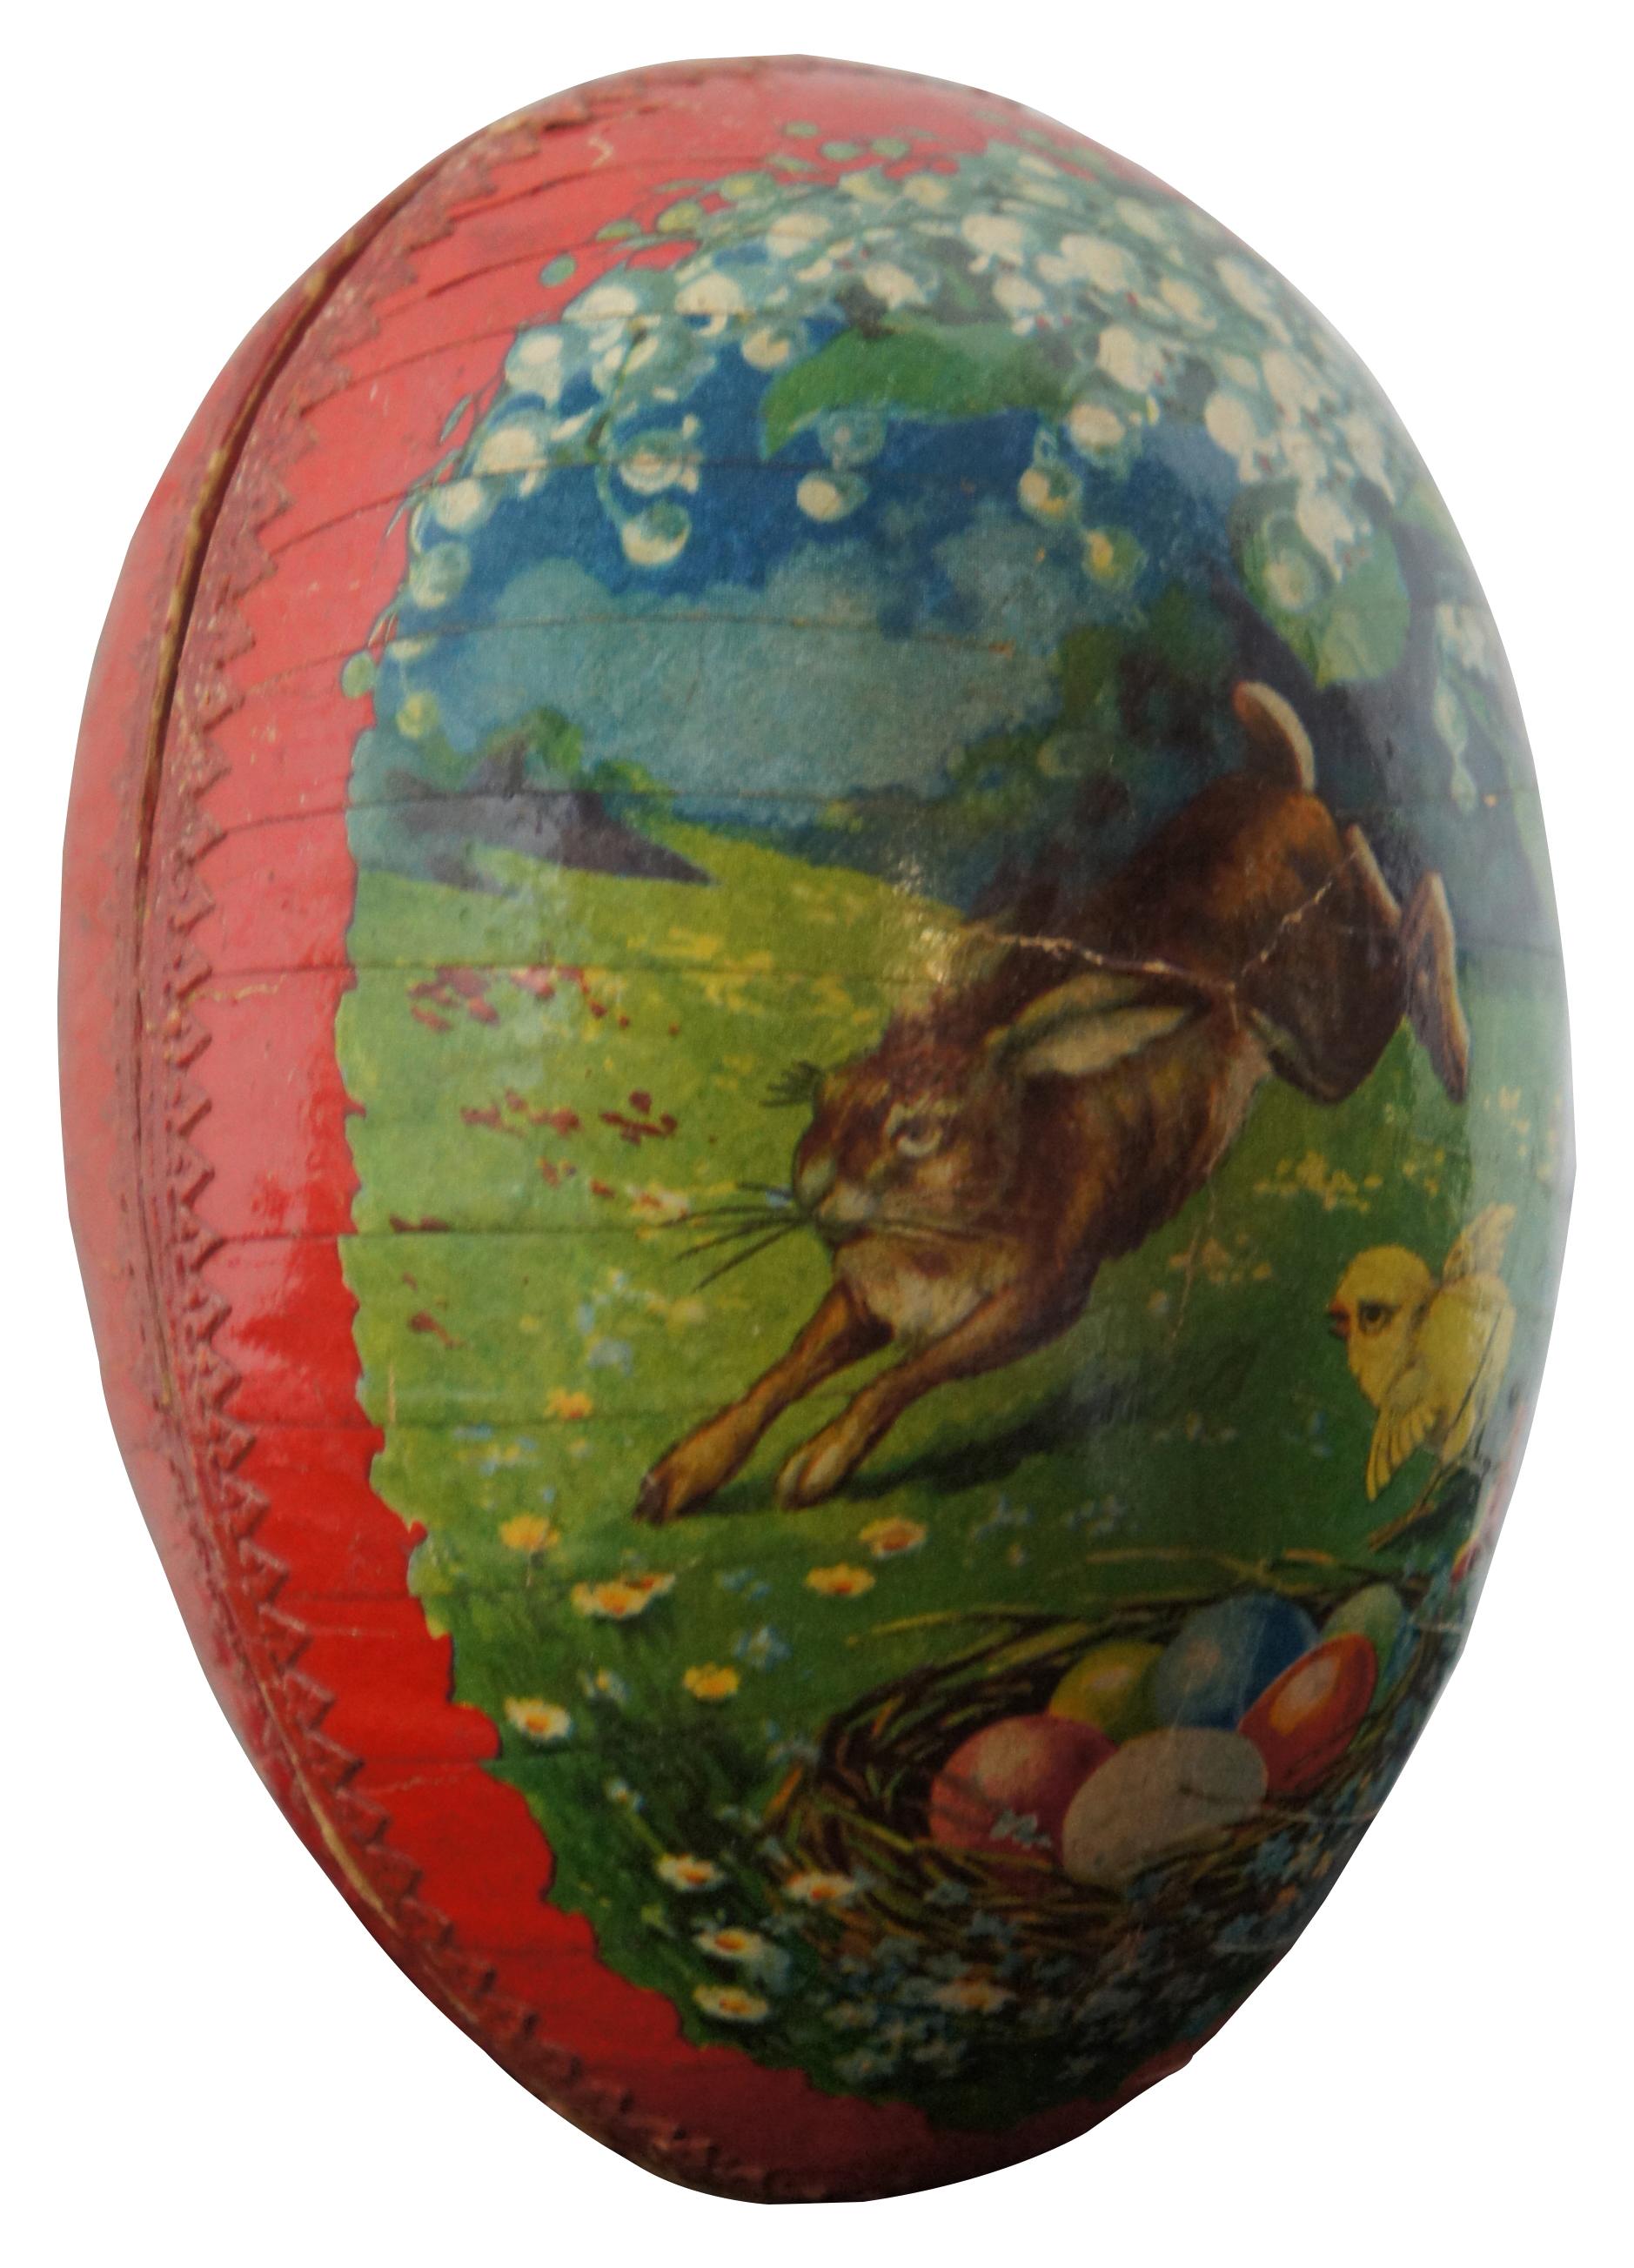 Antique German papier mâché Easter egg candy container, featuring a lithograph landscape of a rabbit leaping beneath lily of the valley blossoms, past a chick by a nest of Easter eggs. Measure: 5